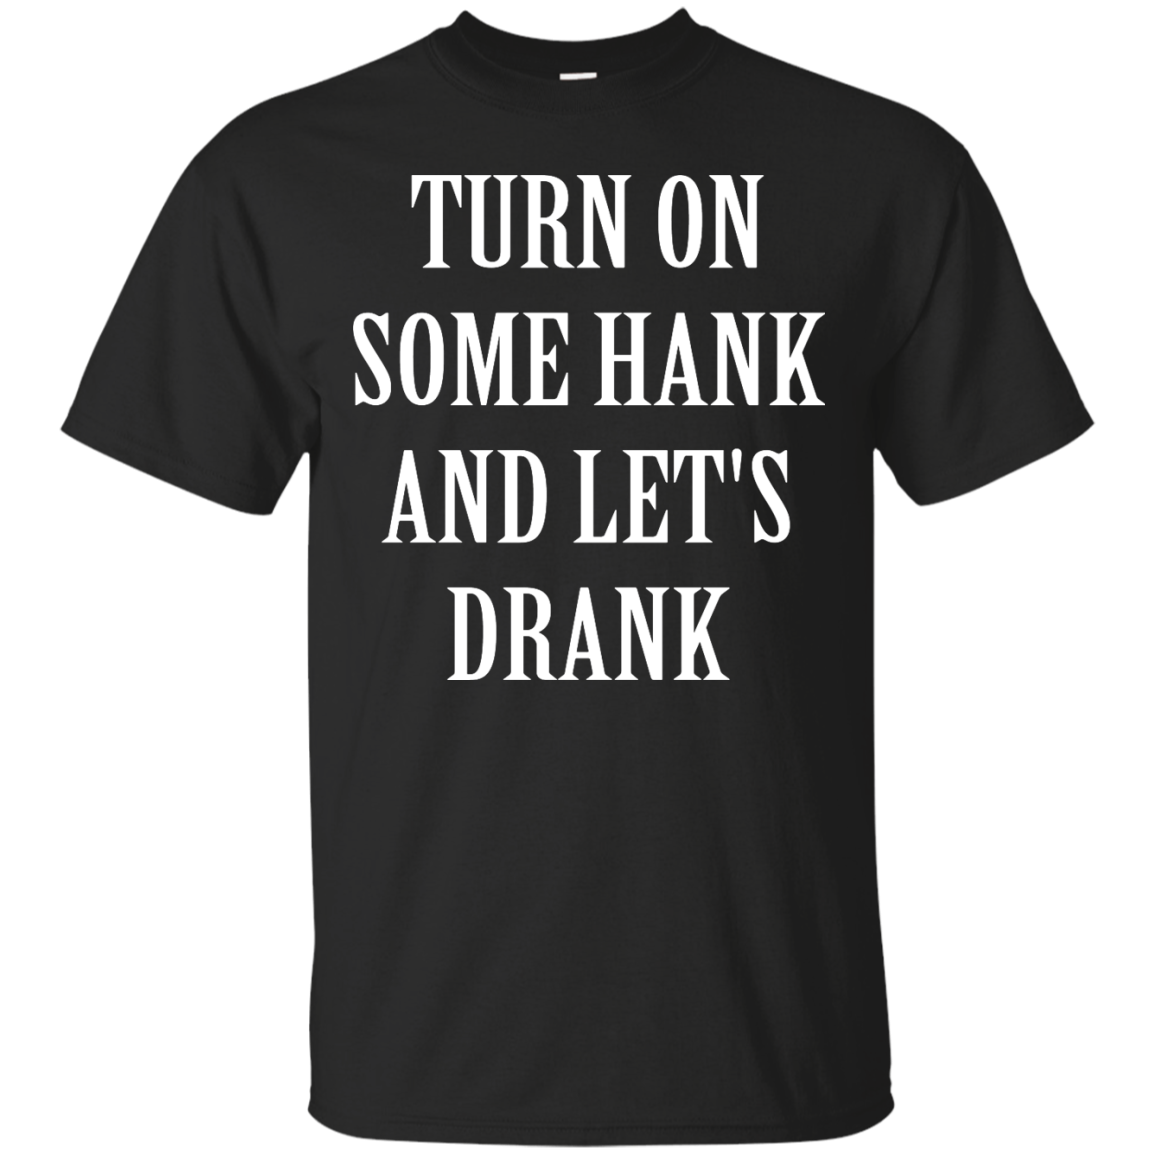 Turn on some hank and let's drank shirt, tank, long sleeve